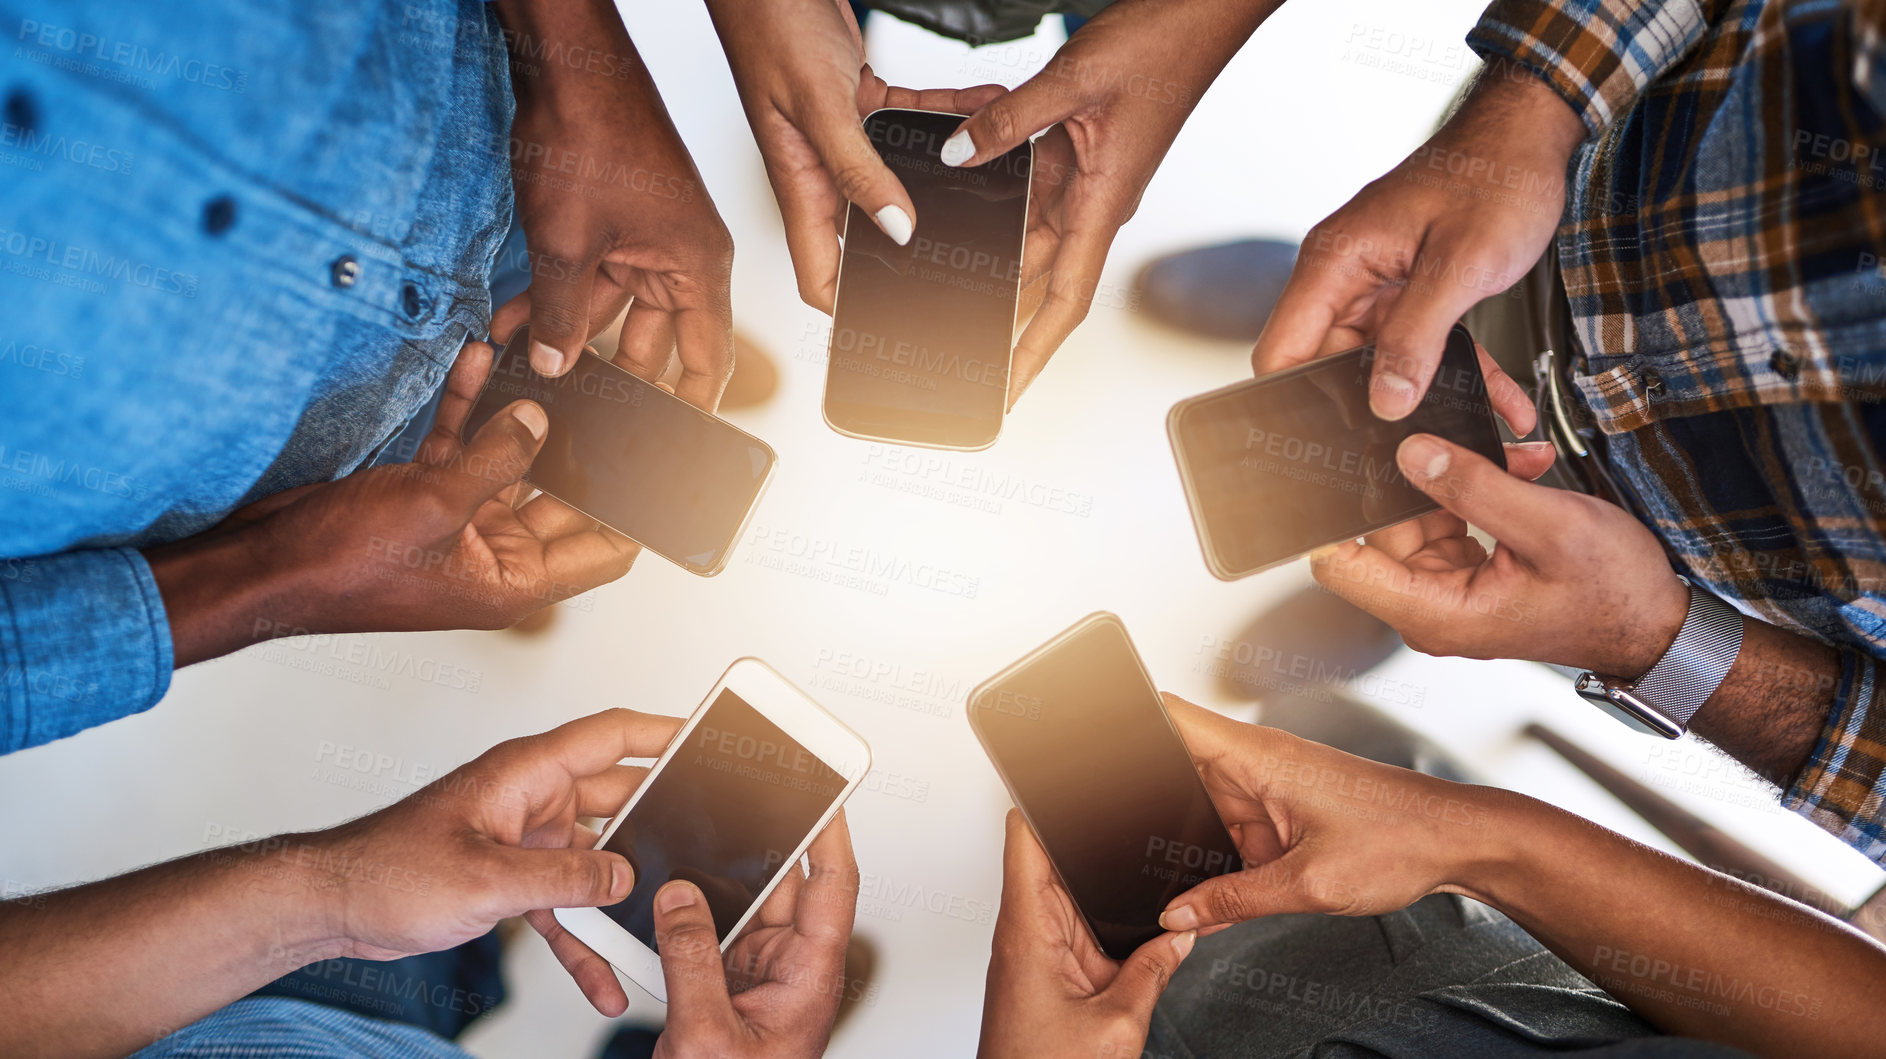 Buy stock photo Cropped shot of a group of people using their smart phones in synchronicity